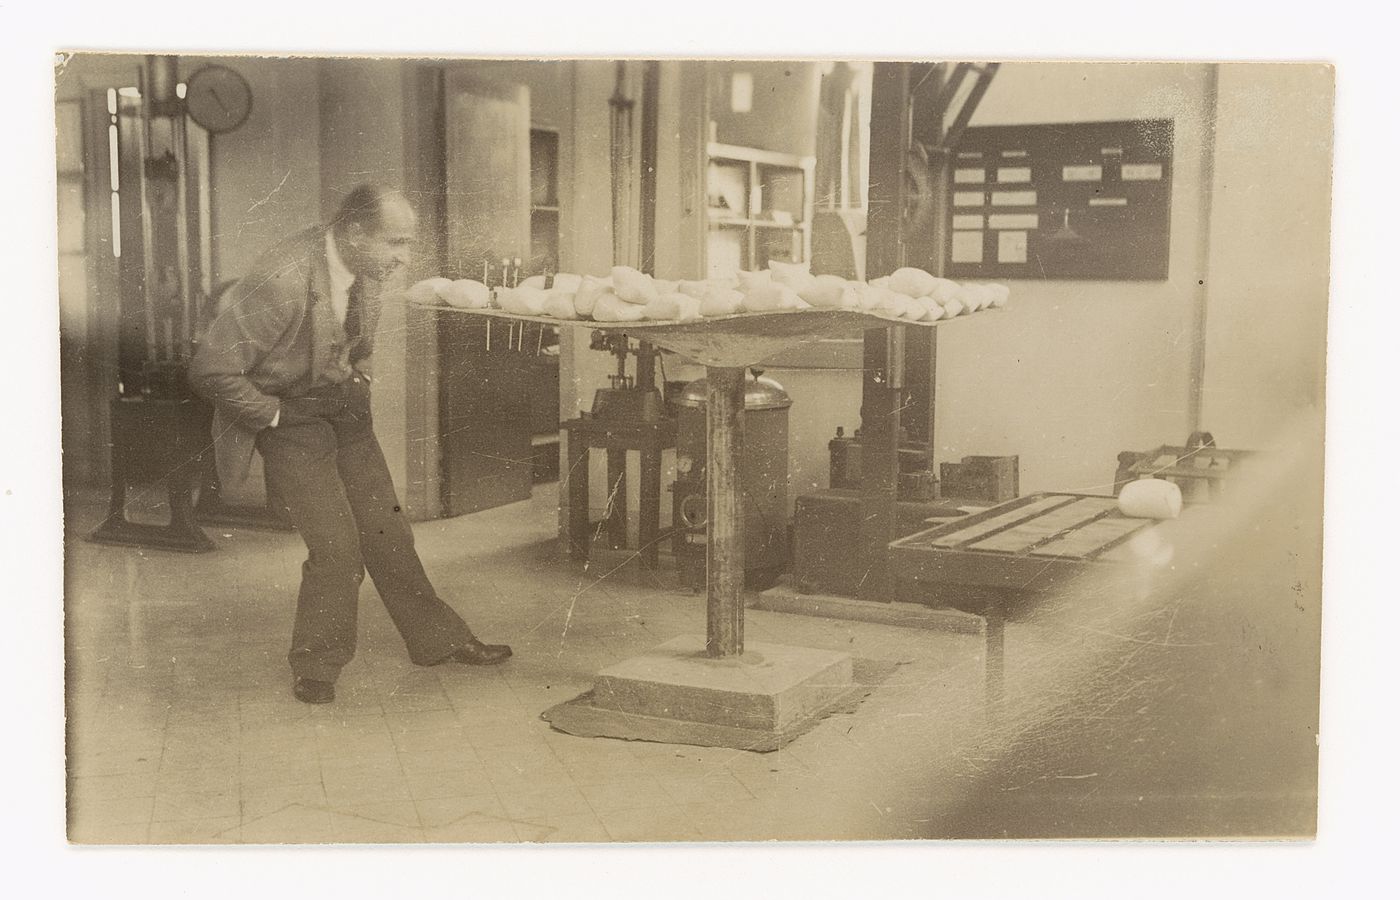 Photograph of an unidentified man doing weight support tests for Una nueva bóveda cáscara, Córdoba, Argentina